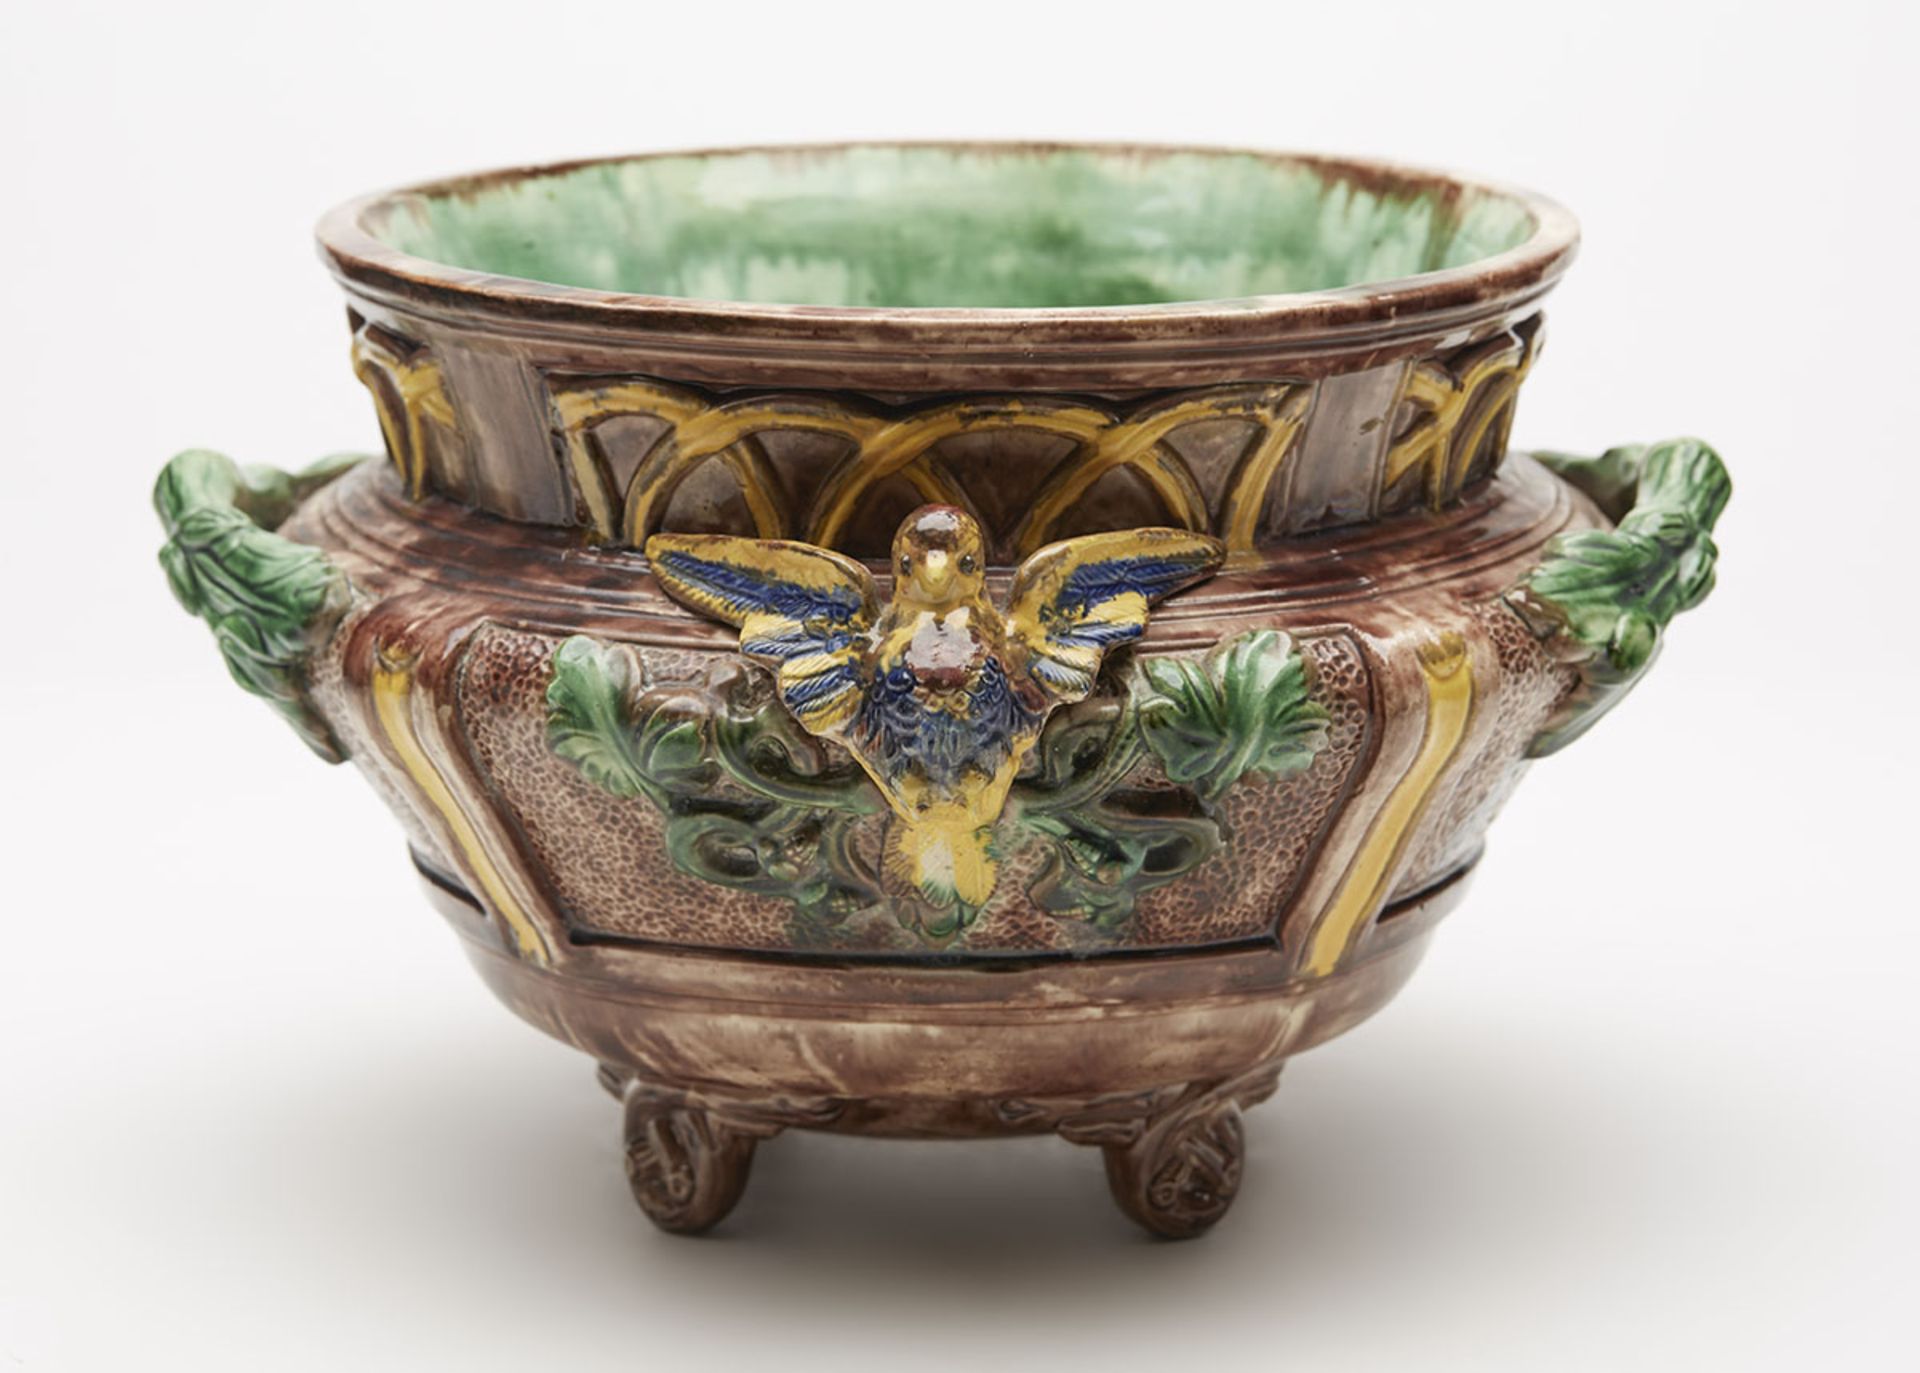 Antique French St Honore Palissy Majolica Planter 19Th C. - Image 5 of 10